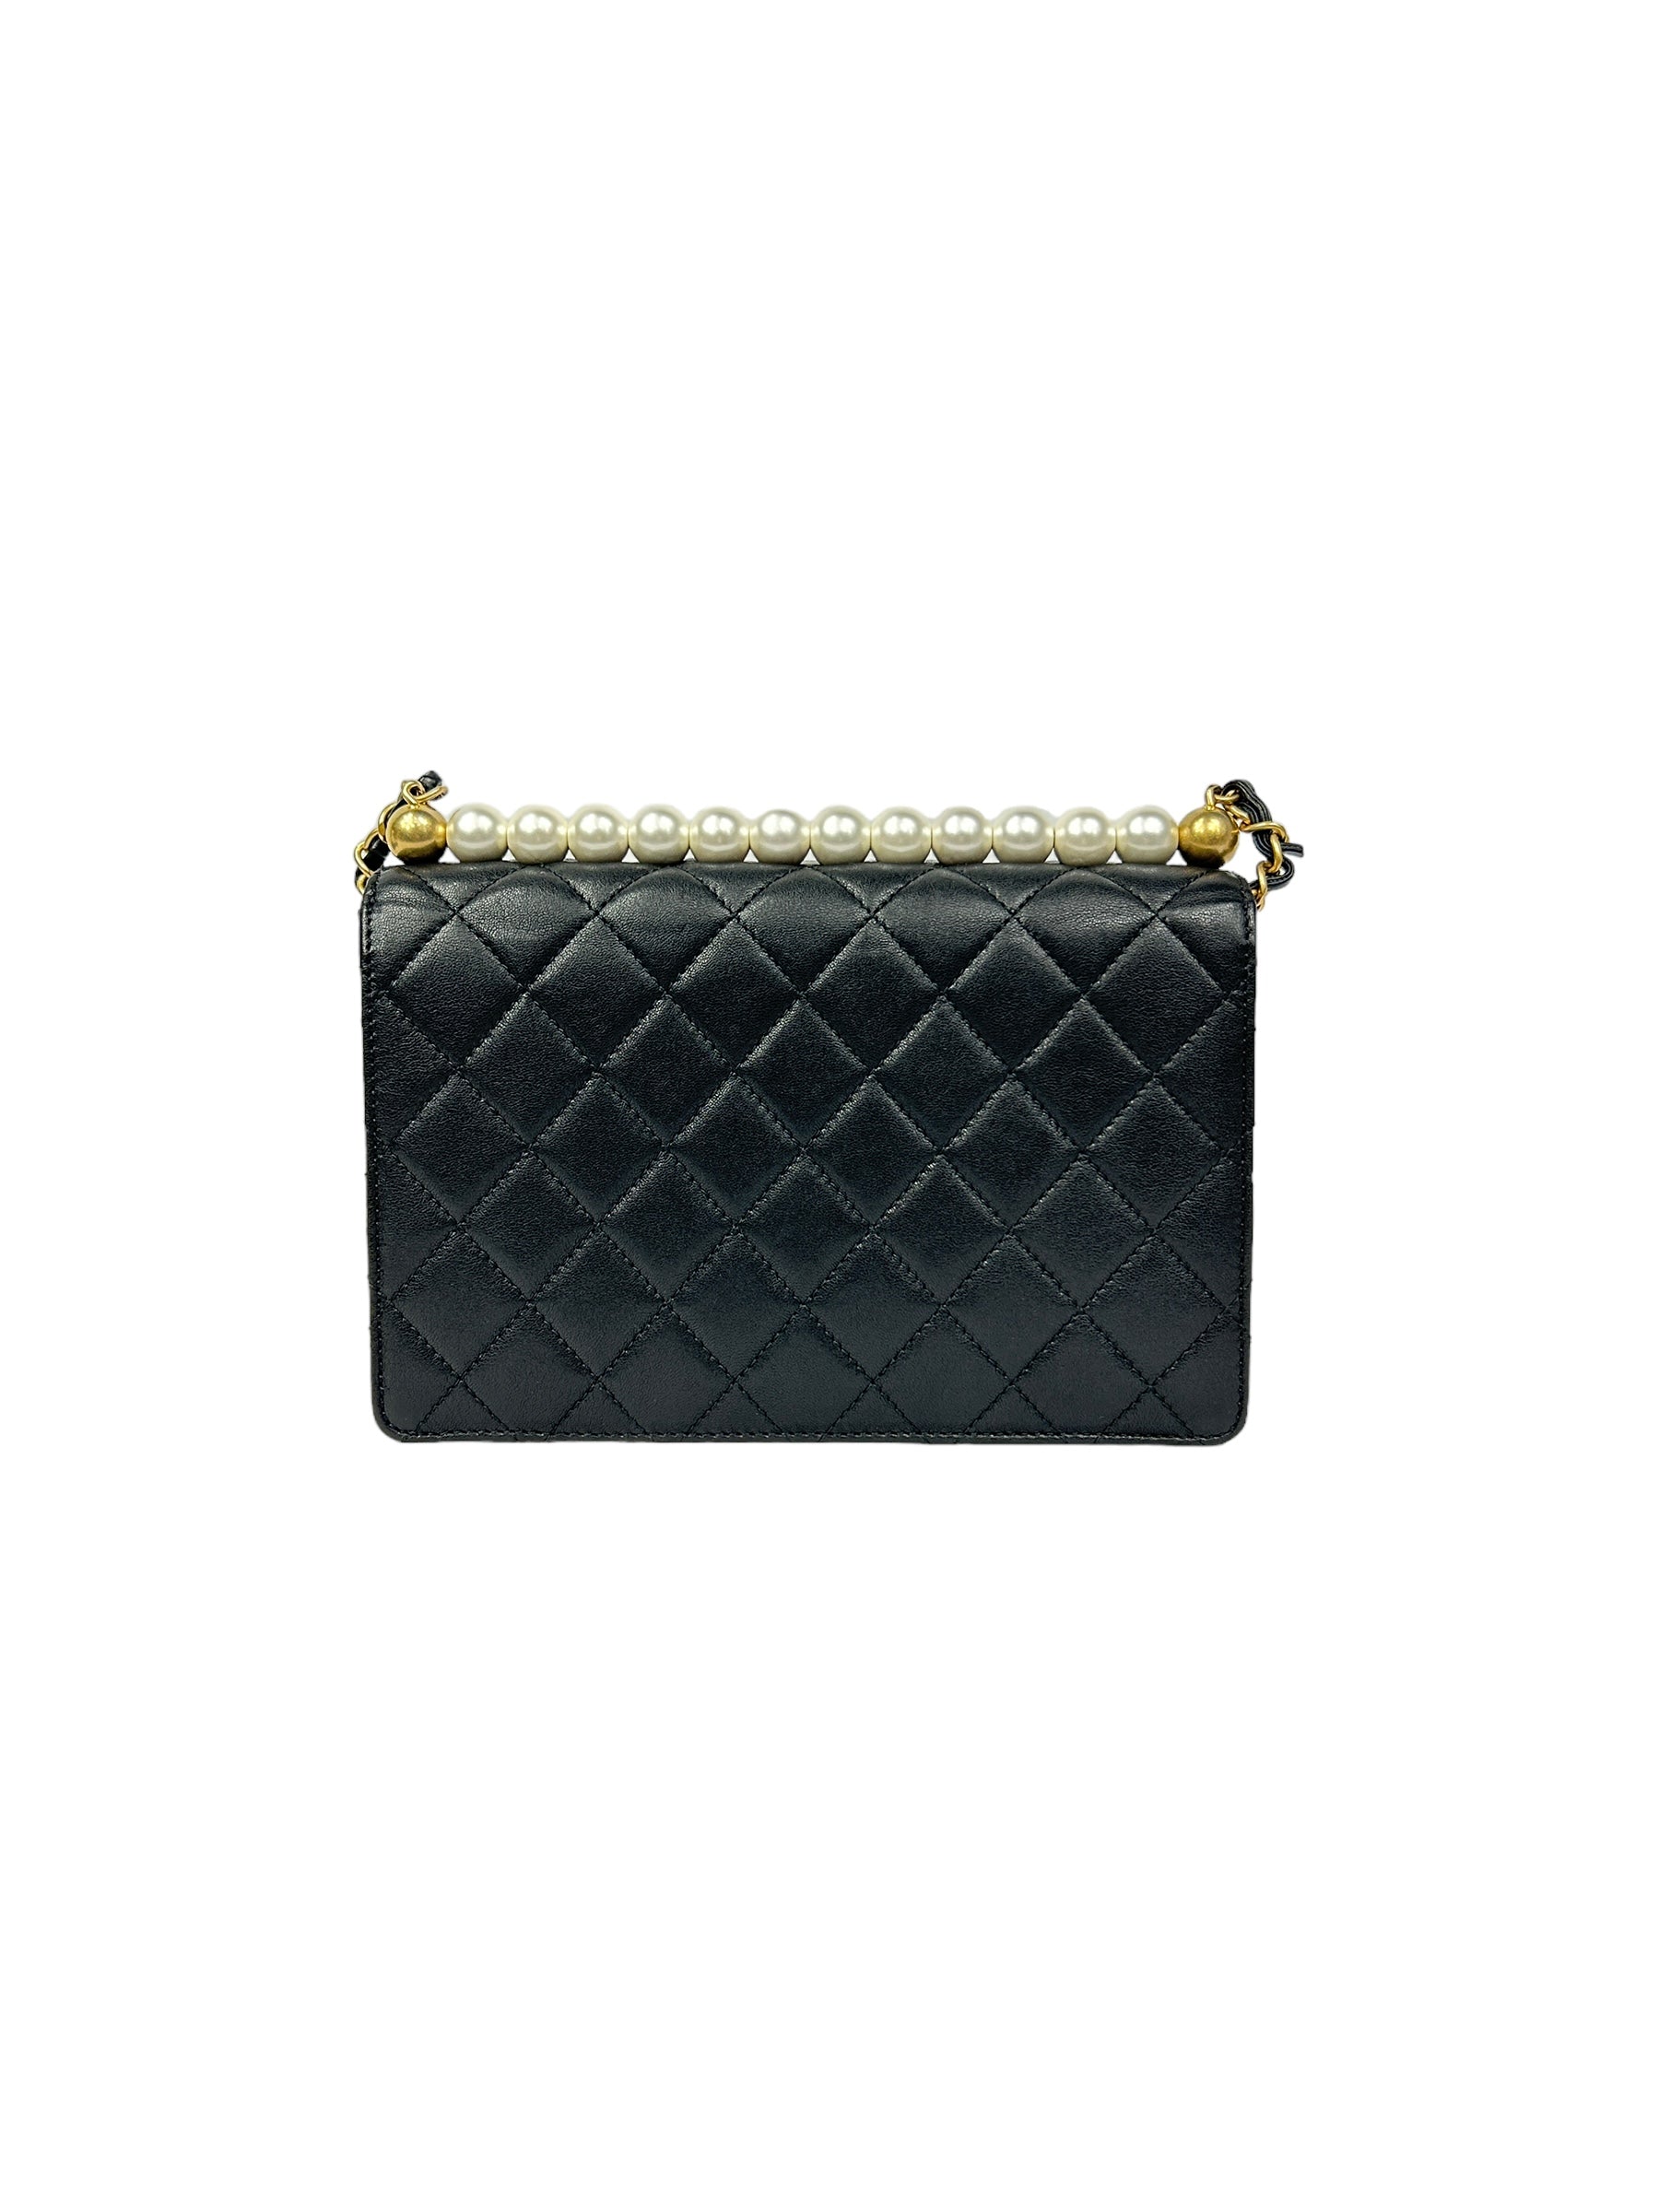 Black Quilted Calfskin Leather Small Chic Faux Pearl Flap Bag w/AGHW